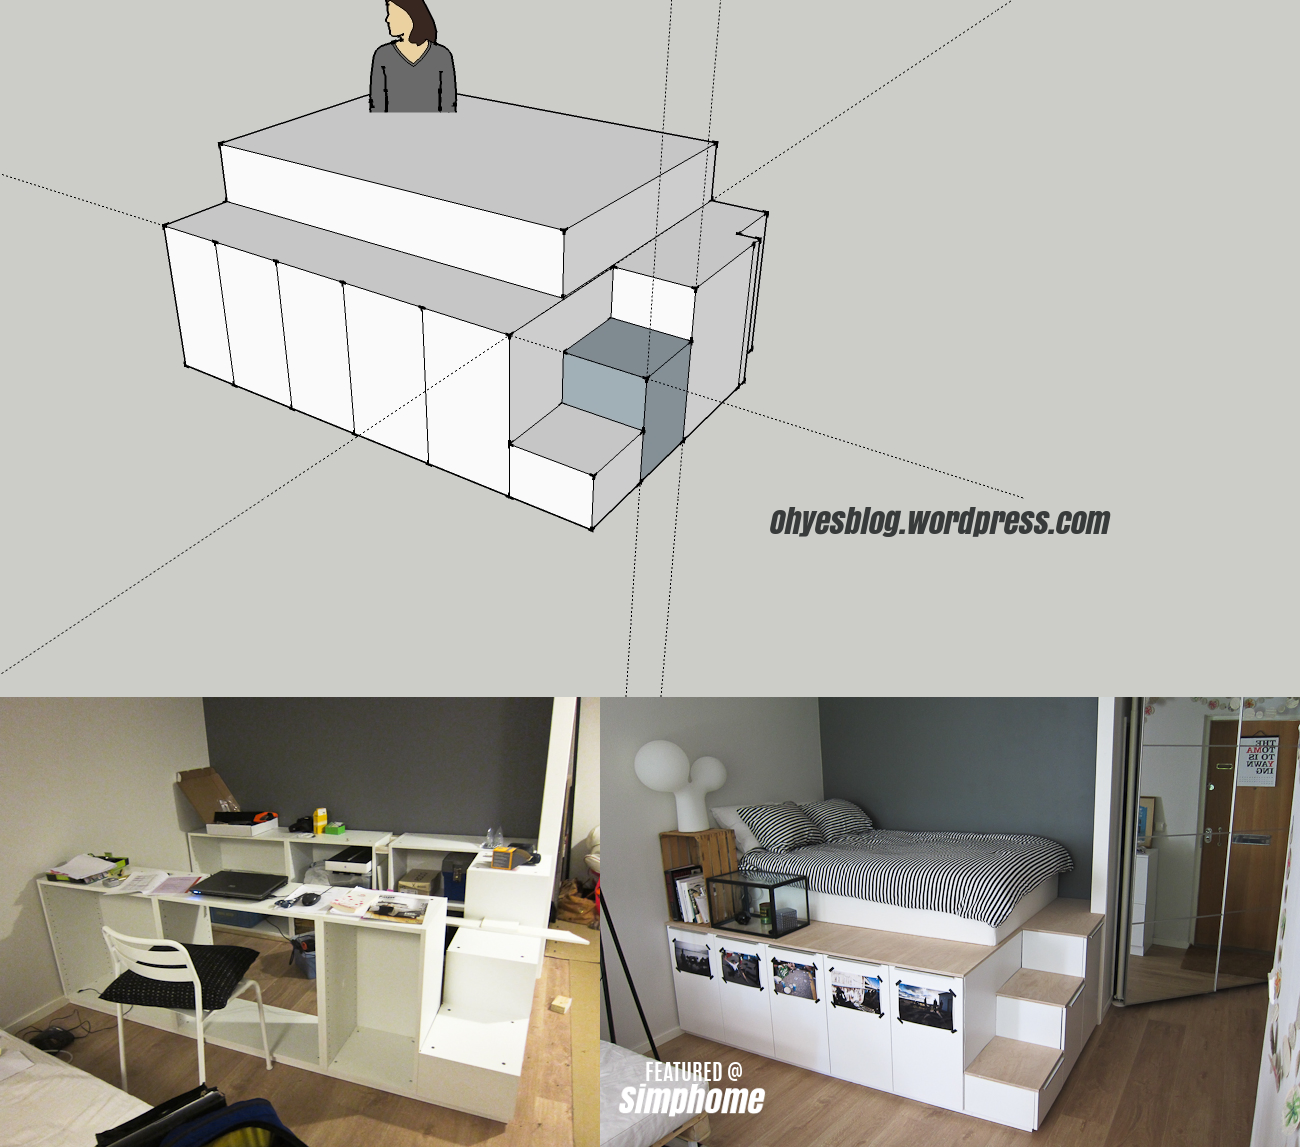 38 Build a platform bed with under bed storage using IKEA cabinets via simphome